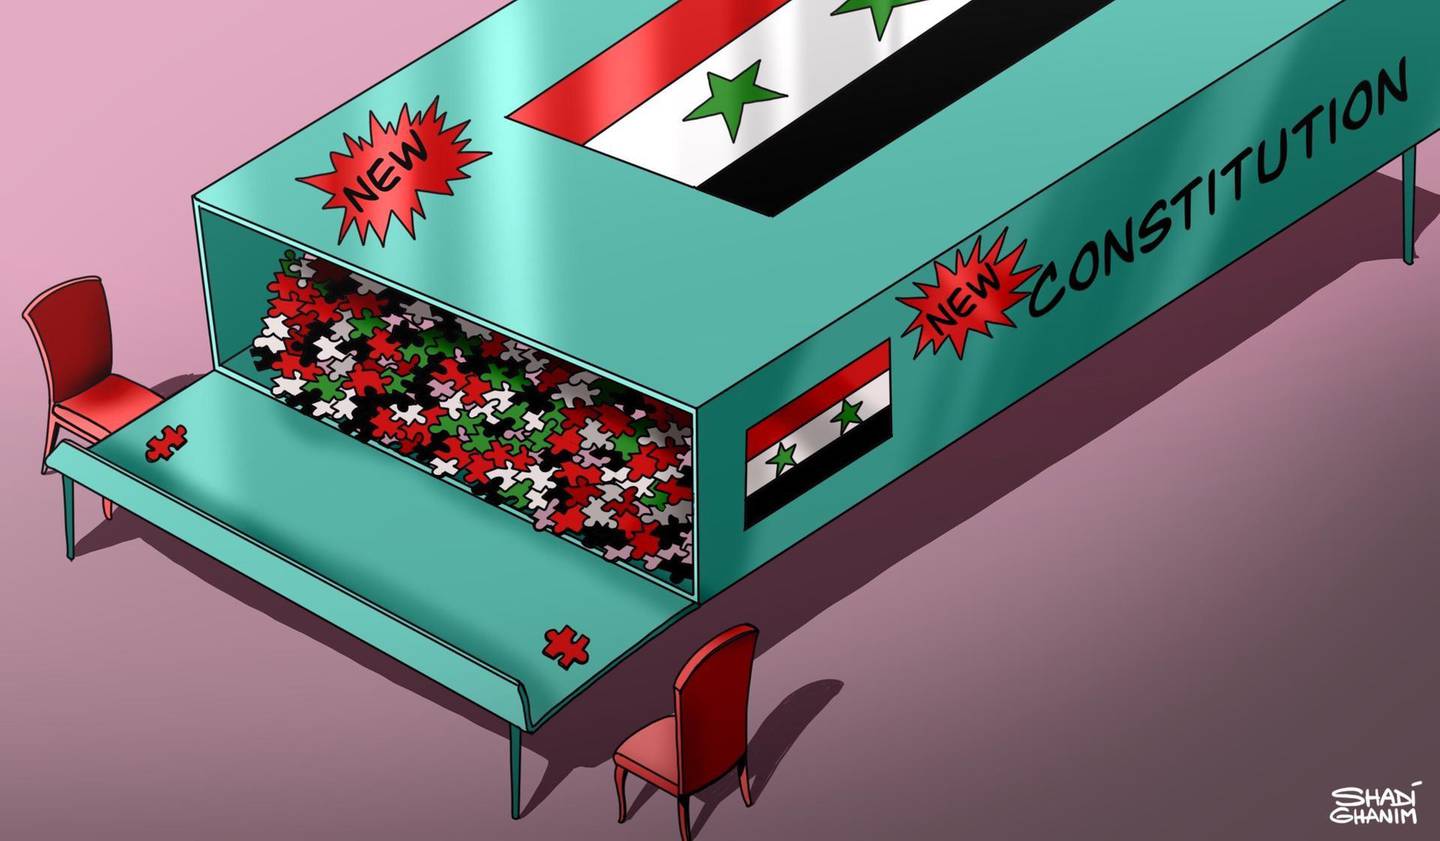 Our cartoonist Shadi Ghanim's take on the process under way to write Syria's new constitution.